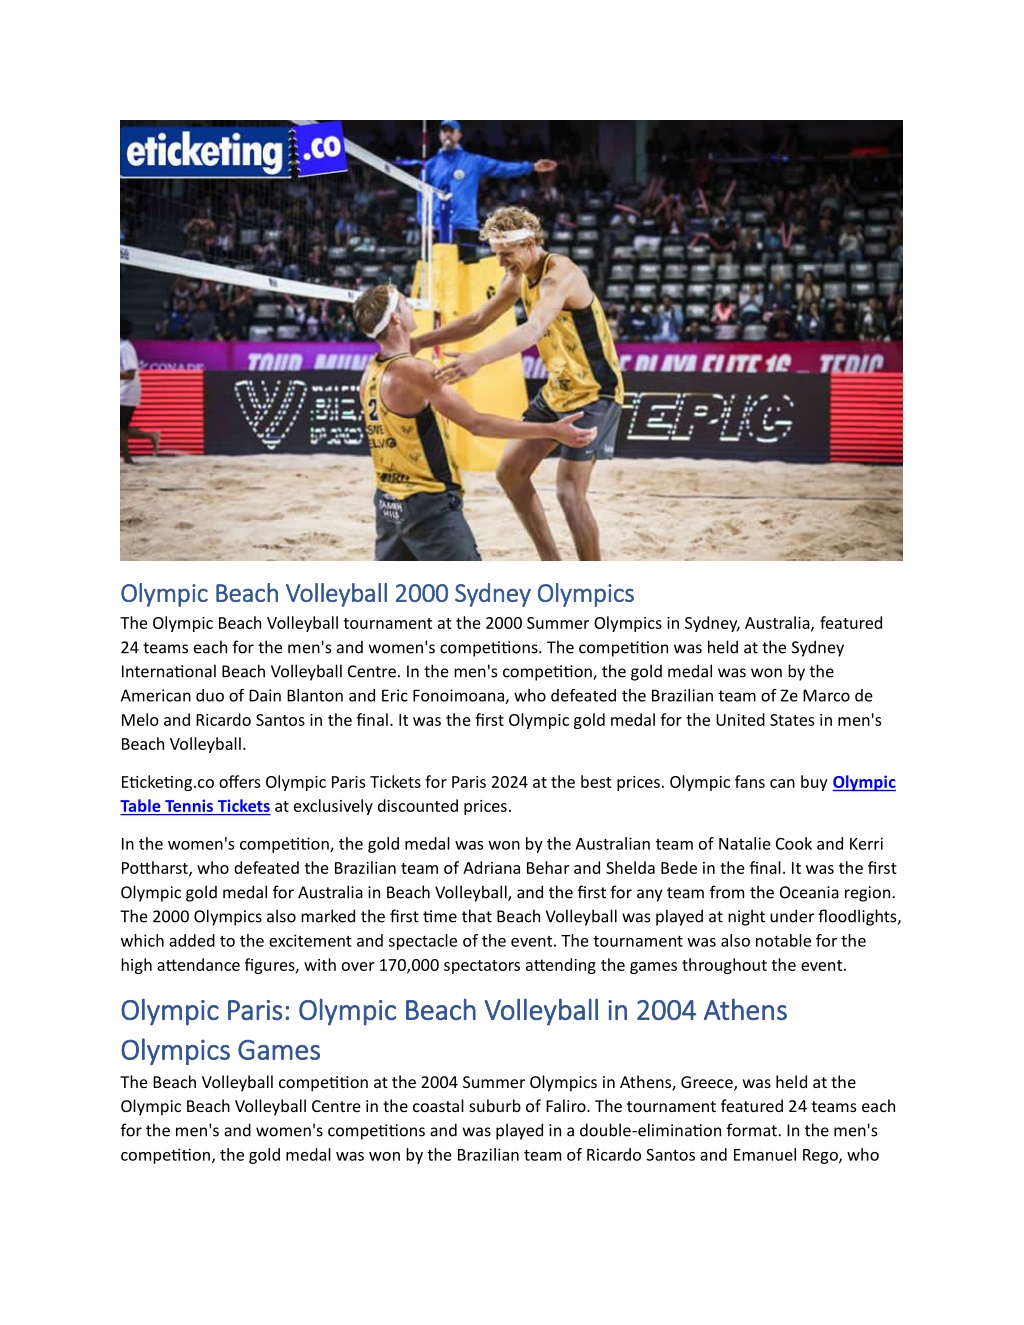 PPT Olympic Beach Volleyball Complete info till Paris 2024 Olympic